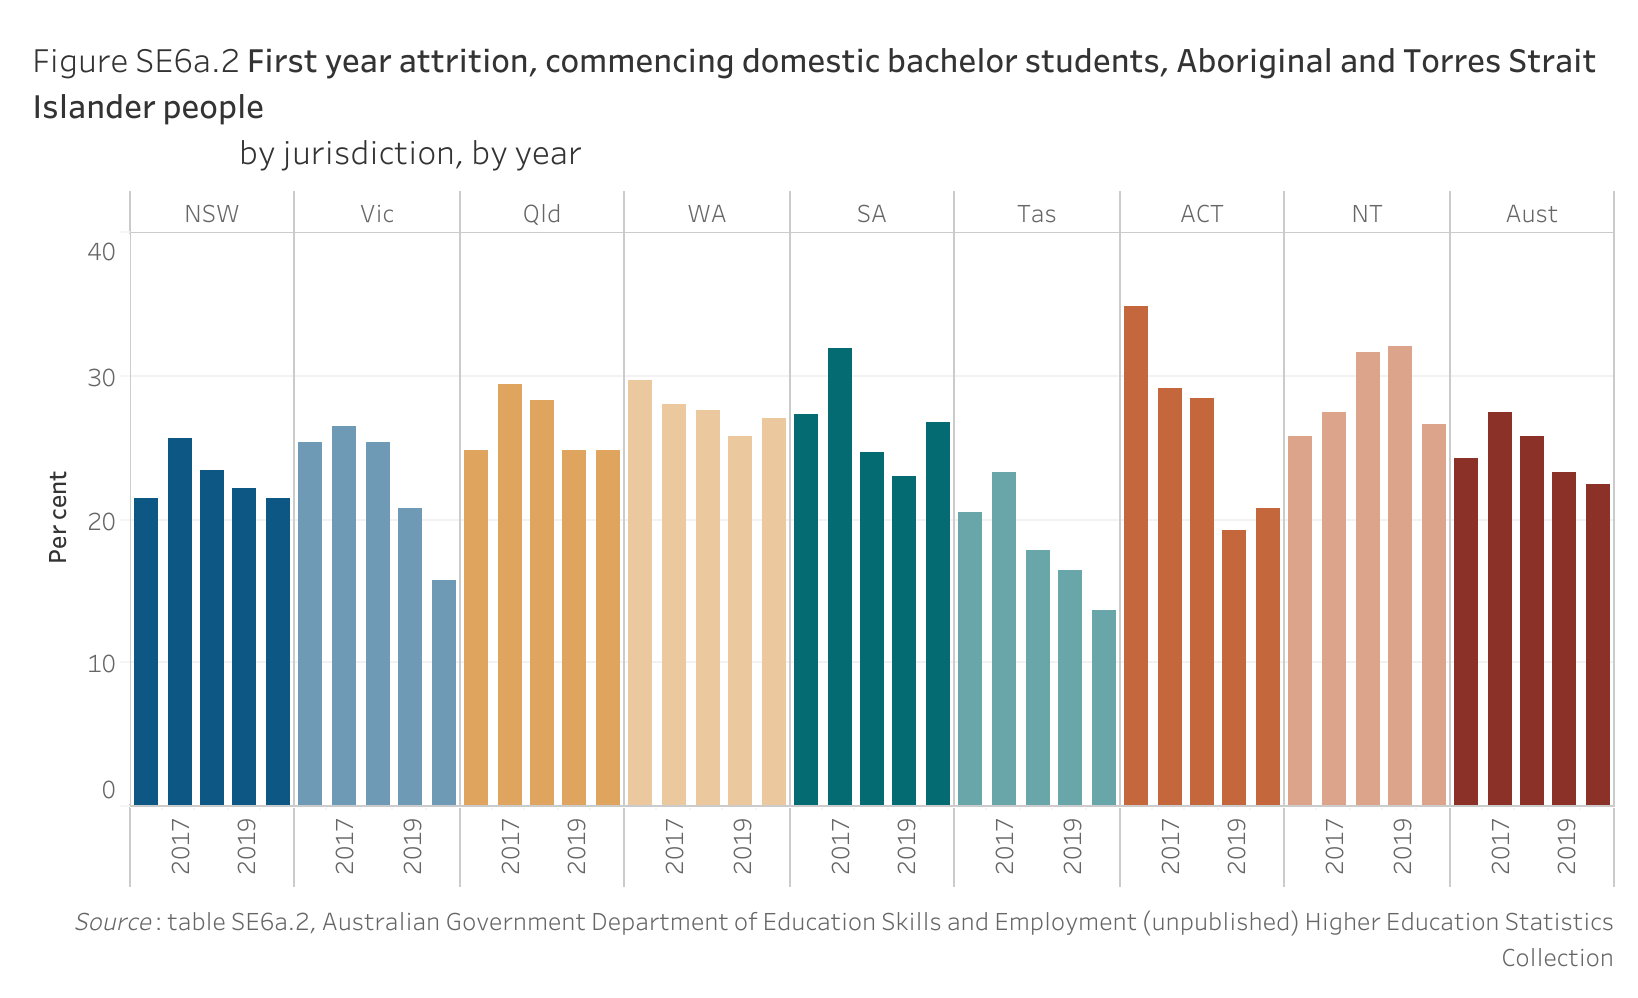 Figure SE6a.2 shows the first year attrition, commencing domestic bachelor students, Aboriginal and Torres Strait Islander people, by jurisdiction, by year. More details can be found within the text near this image.